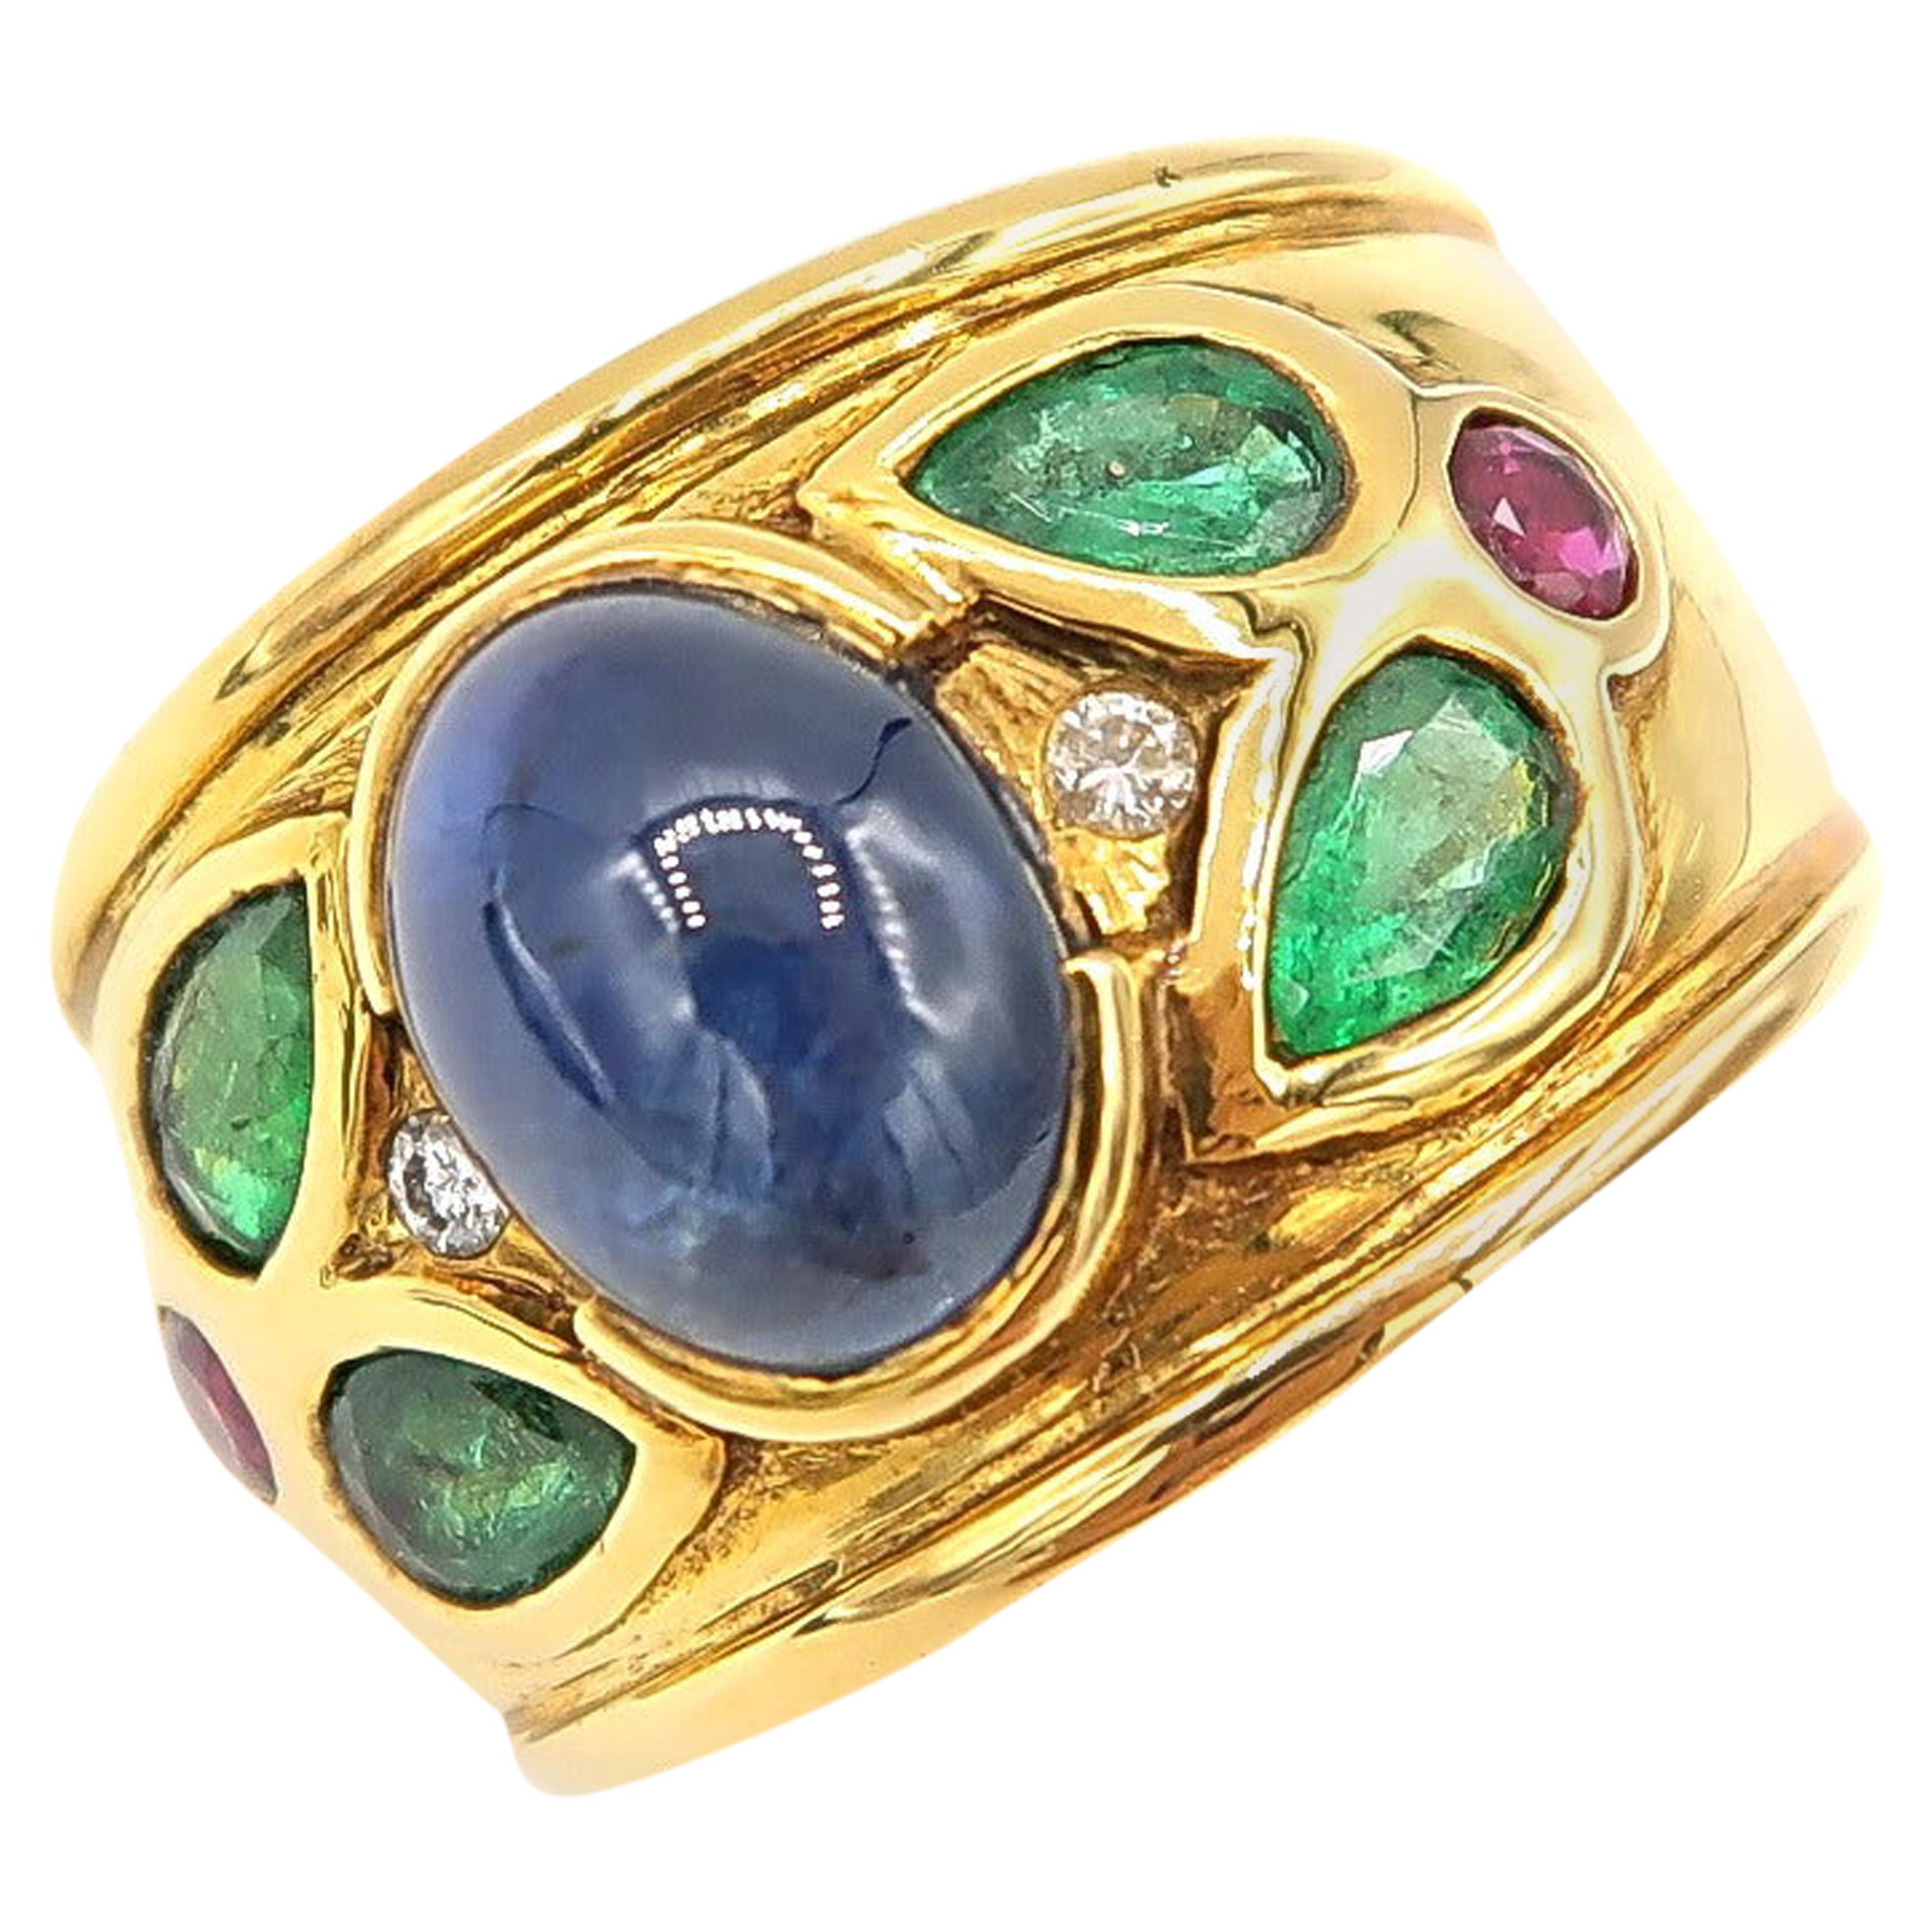 3.48 Carat Cabochon Sapphire 18 Karat Gold Ring with Diamond, Emerald, Rubies For Sale